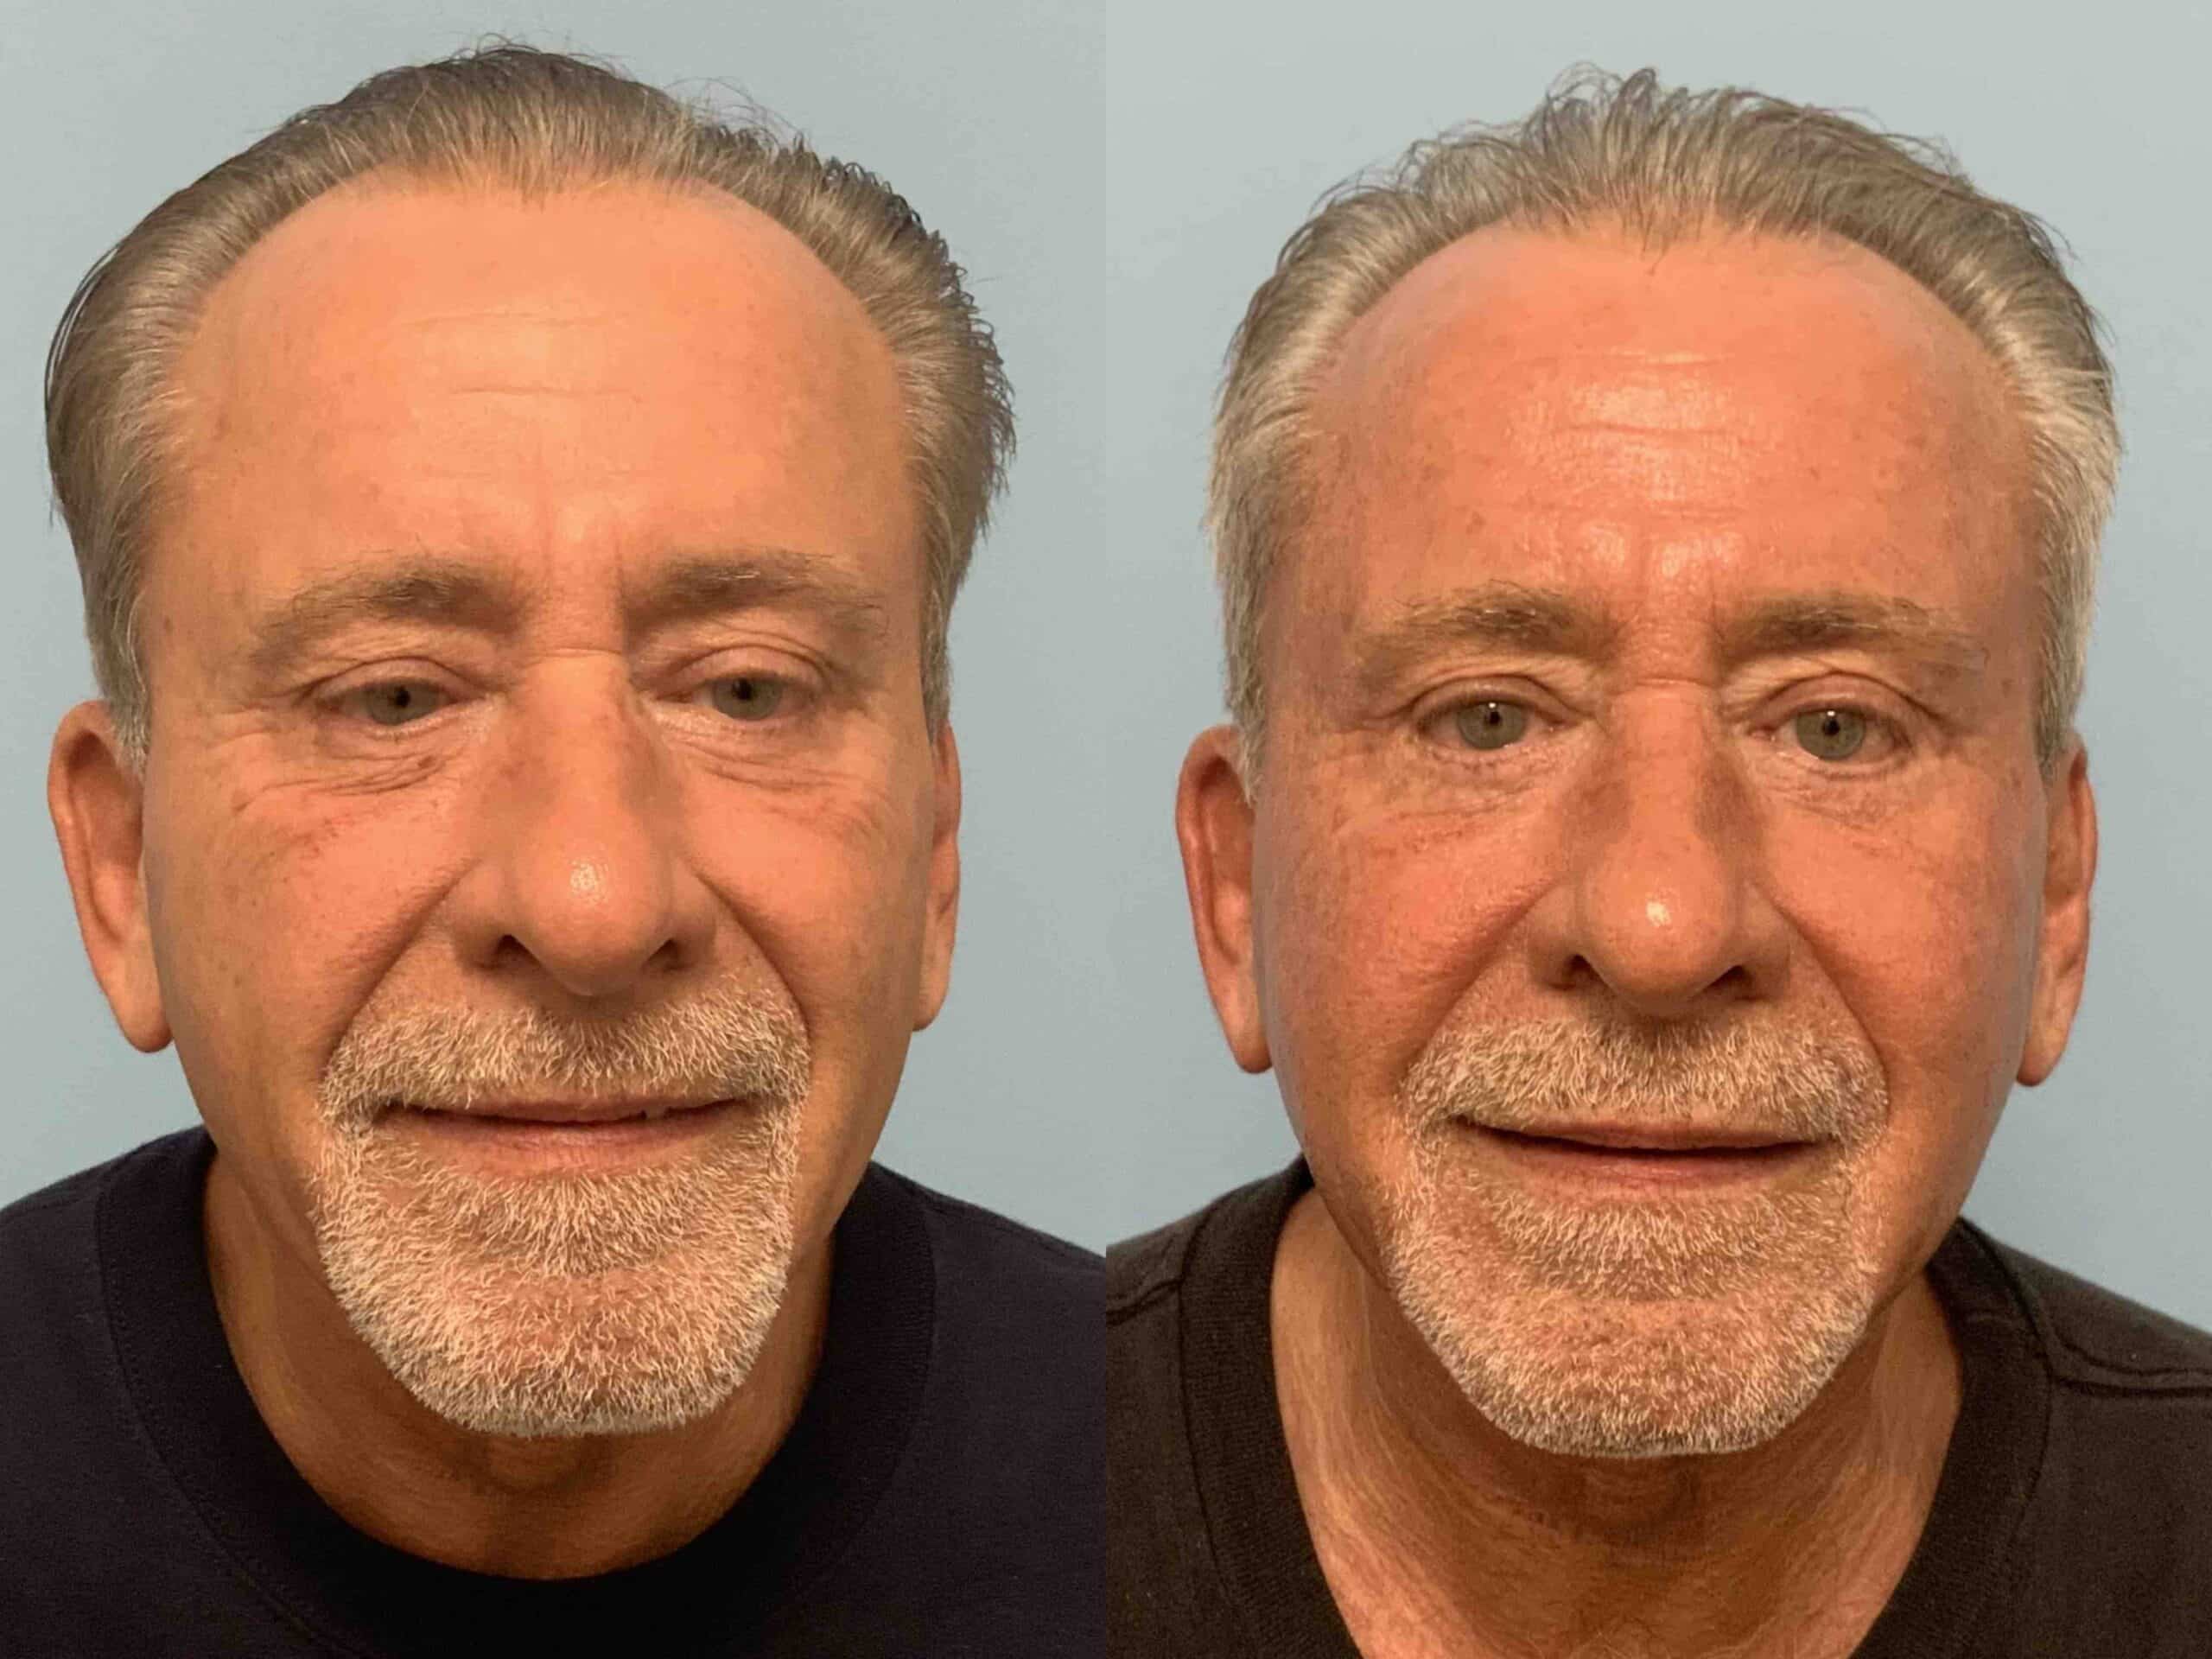 Before and after, 11 months post op from Lower Lid Blepharoplasty/Canthopexy, Sculptra Injectable, performed by Dr. Paul Vanek (front view)